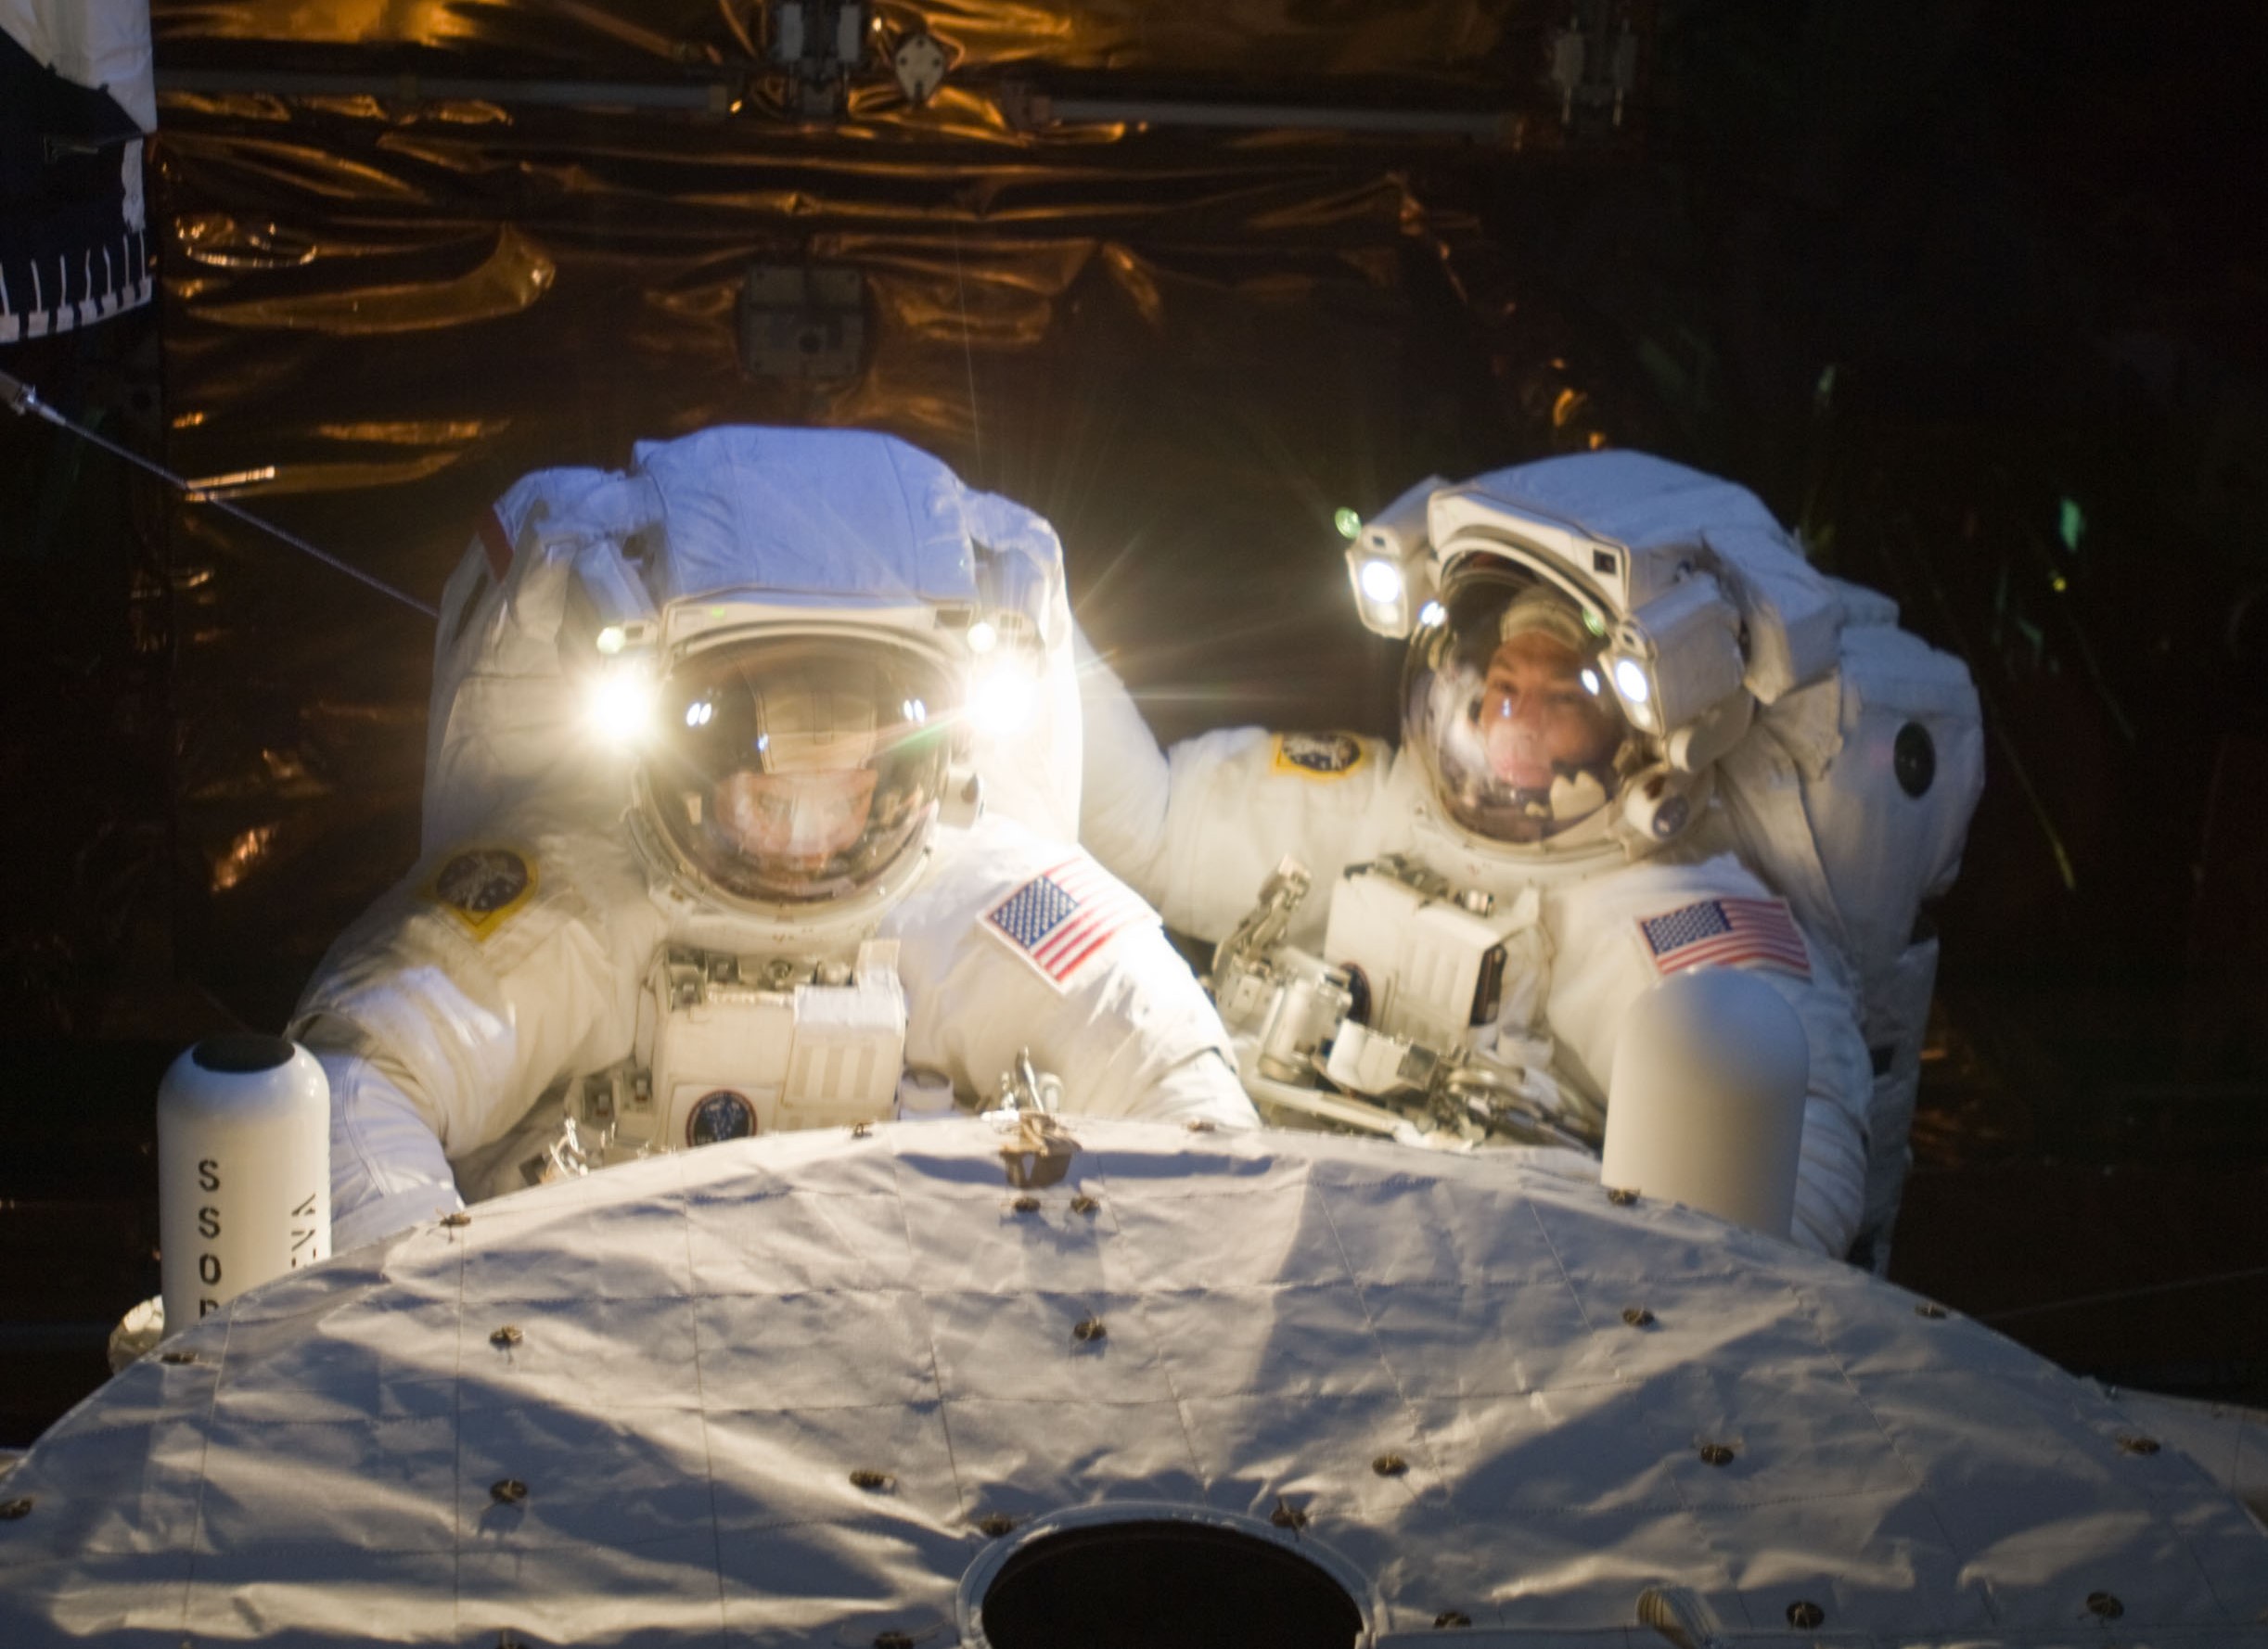 Grunsfeld, left, and Feustel prepare to enter the airlock to conclude the final Hubble servicing spacewalk